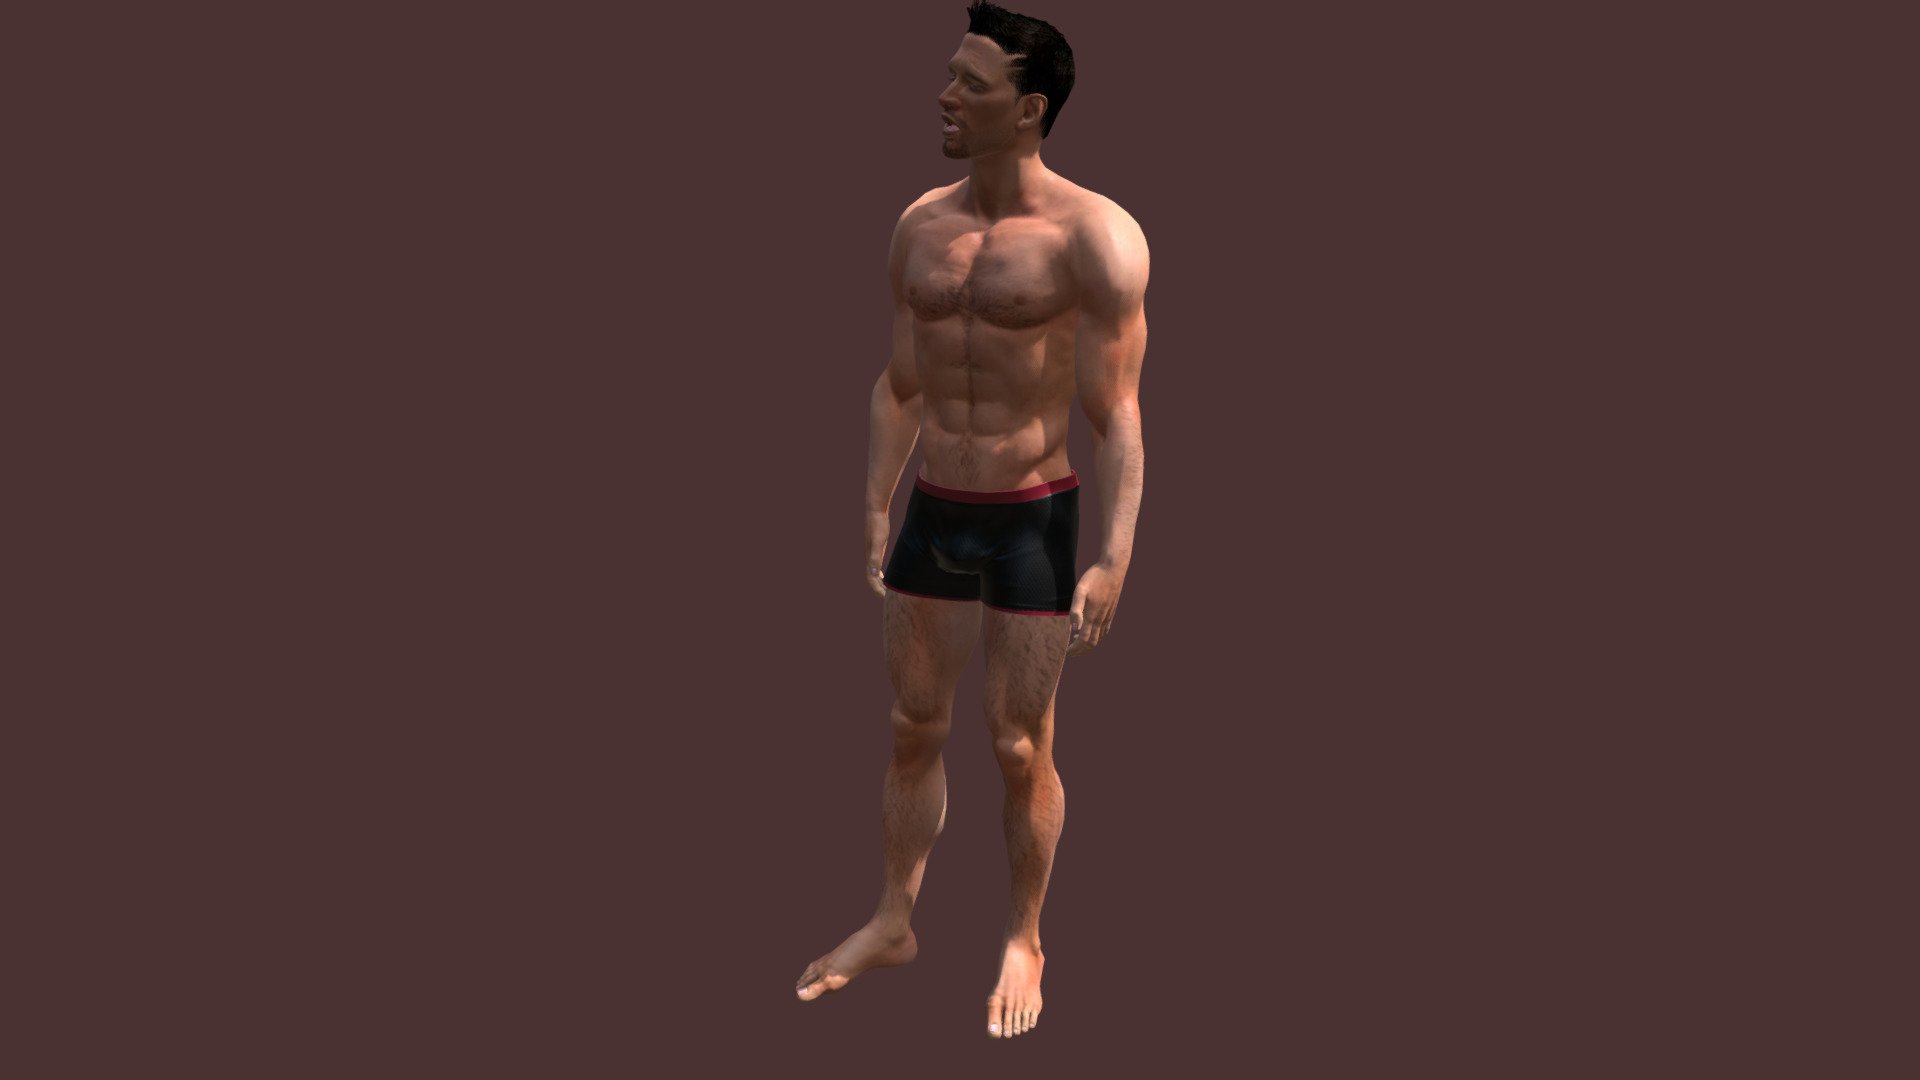 Steward is a sportive man. Realistic and rigged fully, so all animation are possible to create. Speaks as well, demonstration included. Dressed in black boxers, cool really and ready for pose for your presentation. Competative price 3d model